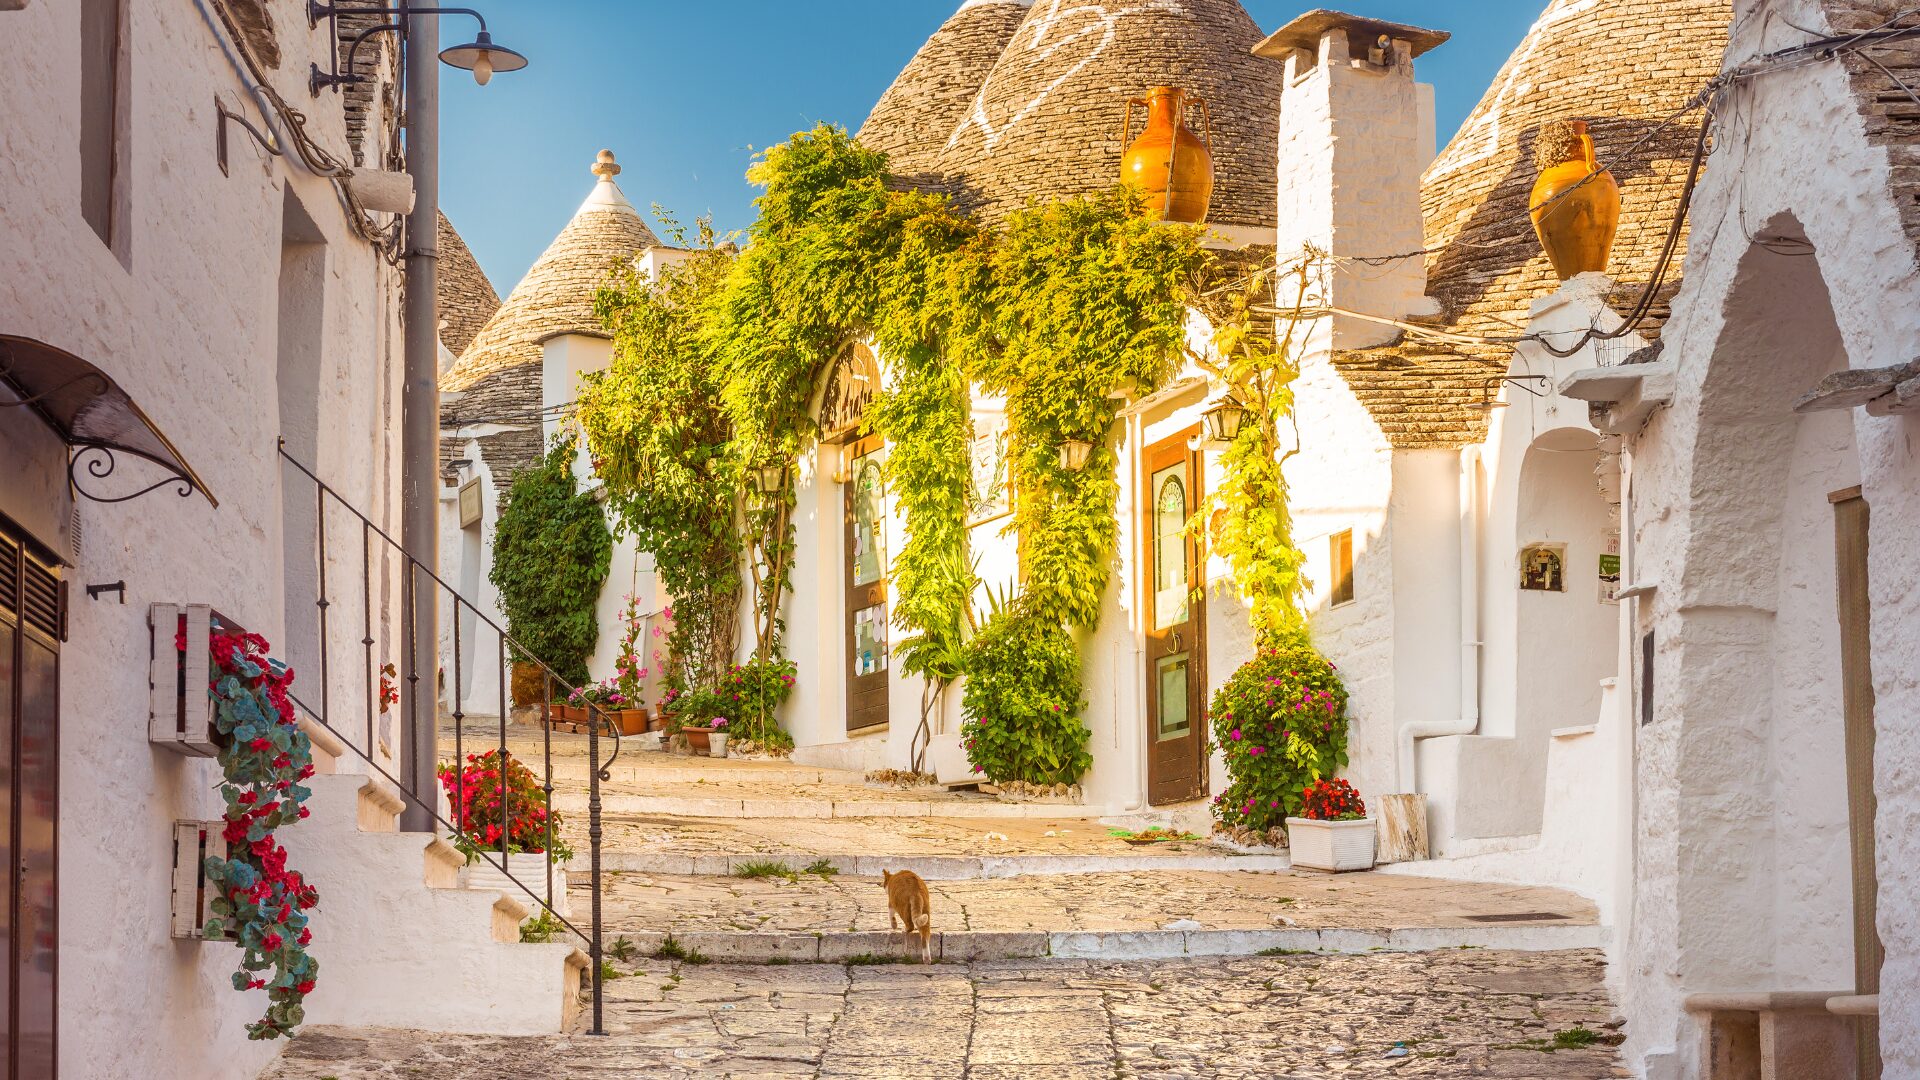 The cobbled streets of Alberobello in Italy